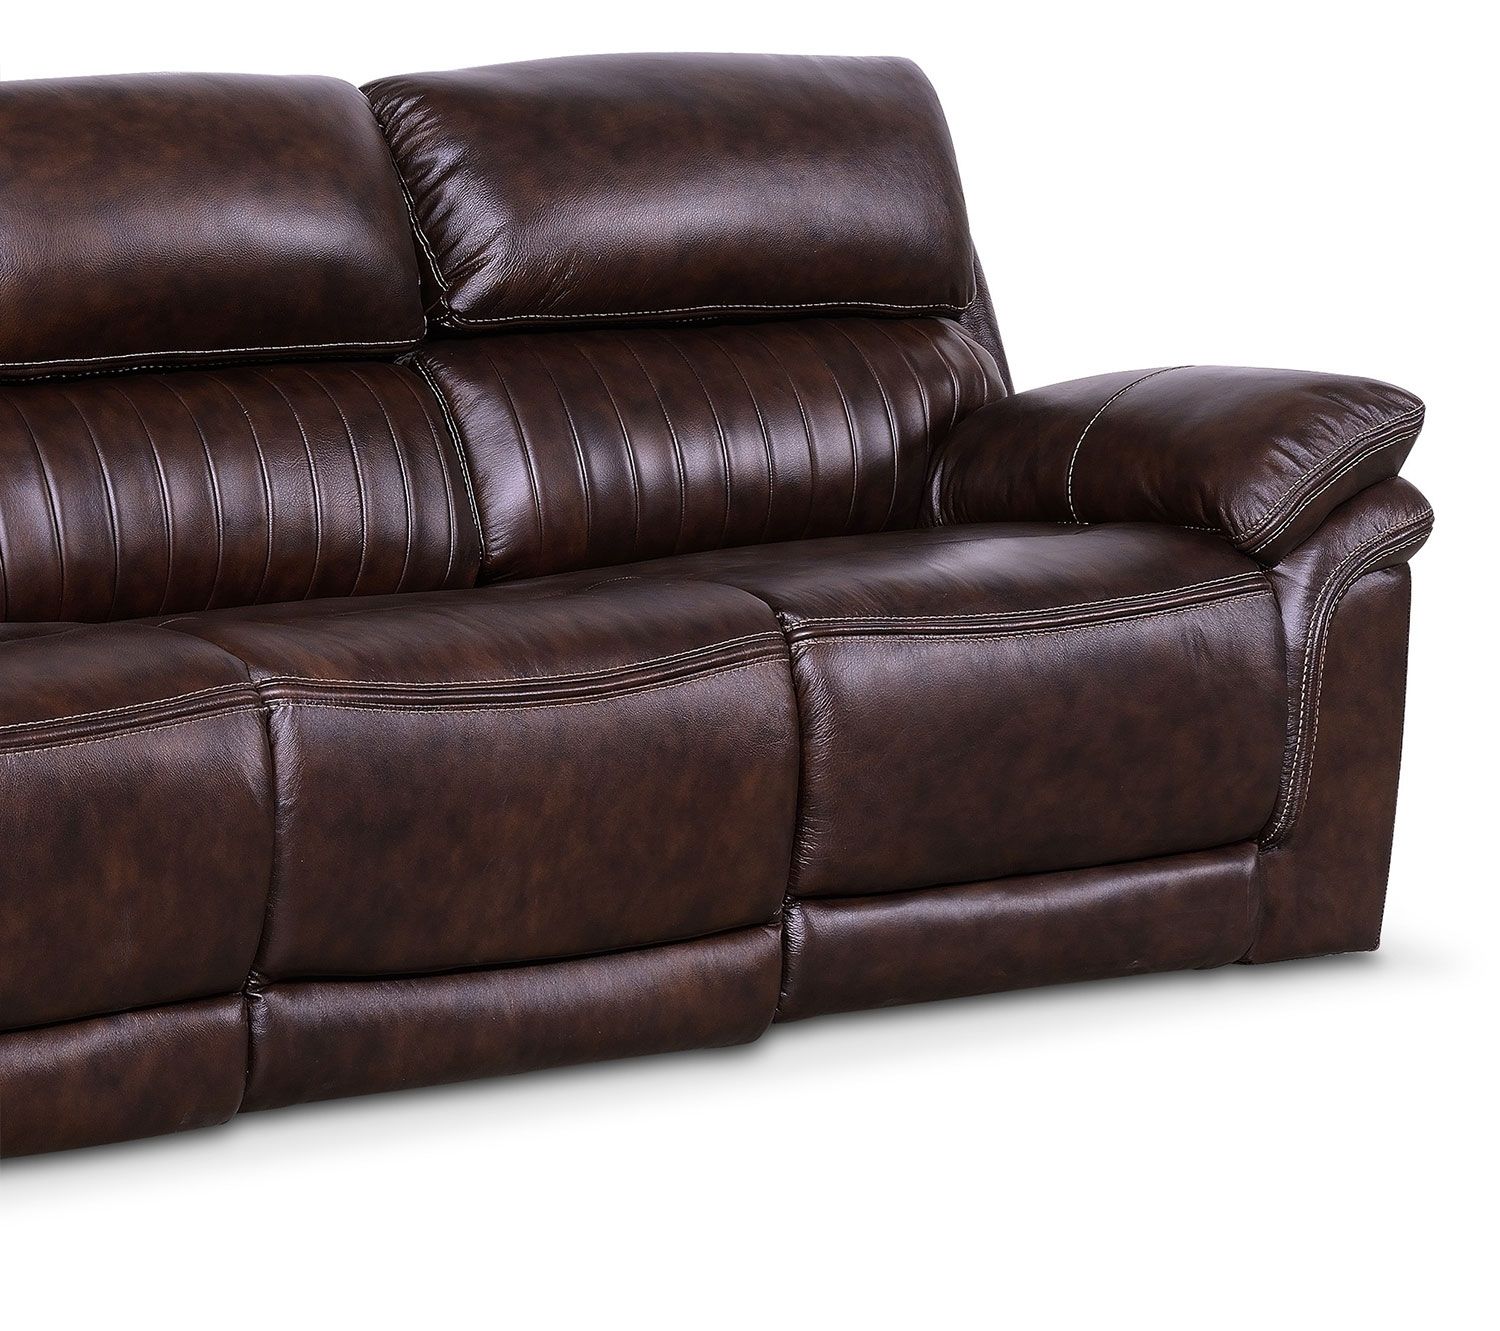 Monterey 3 Piece Power Reclining Sofa – Chocolate | Value City For Recliner Sofas (View 6 of 10)